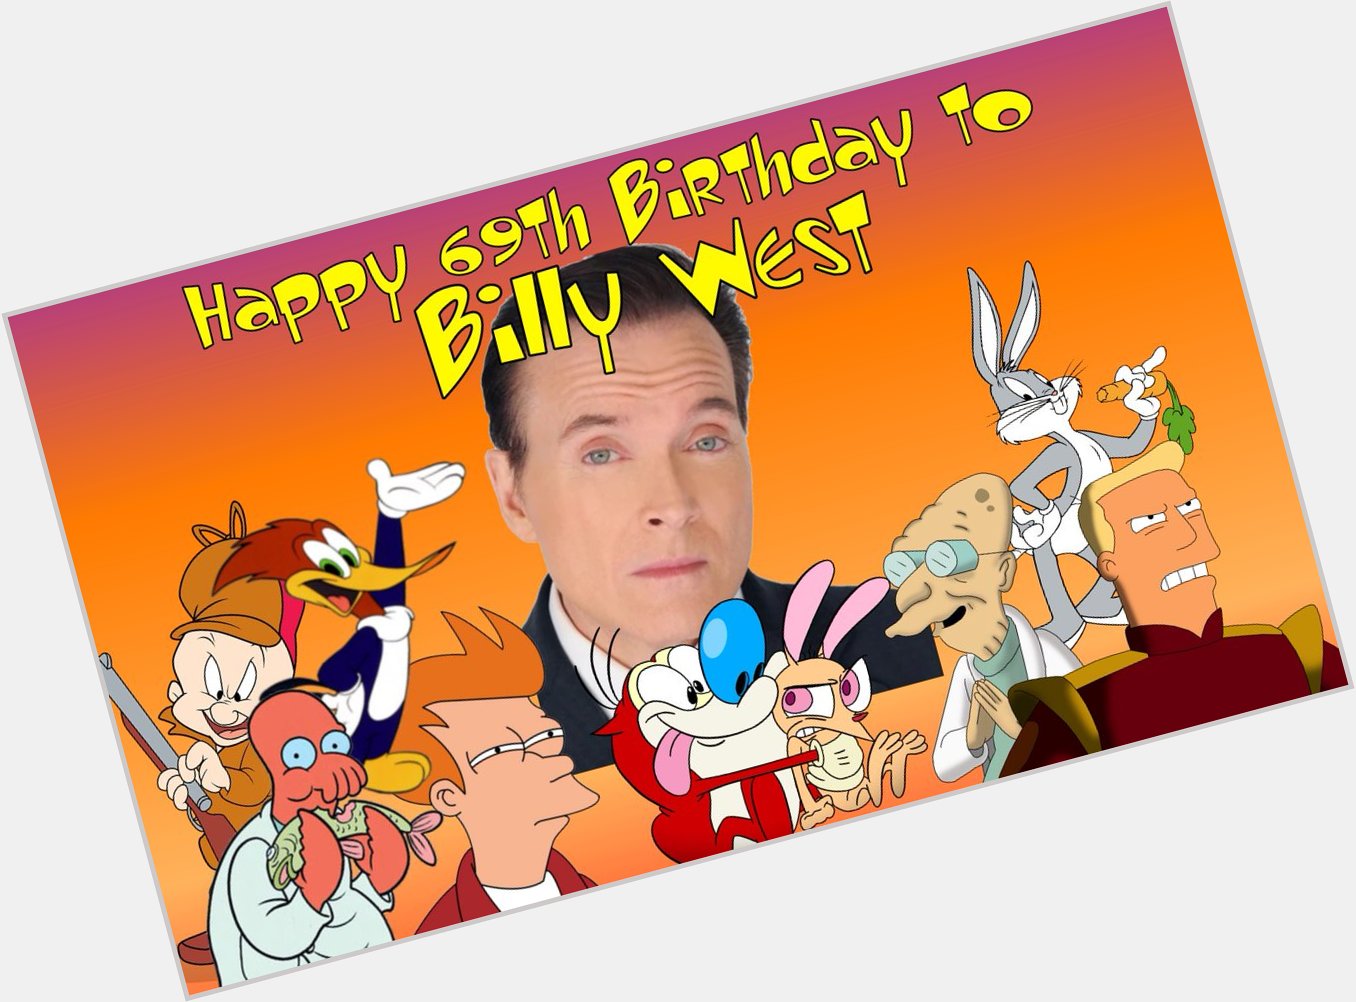 Happy late 69th Birthday to Billy West for 